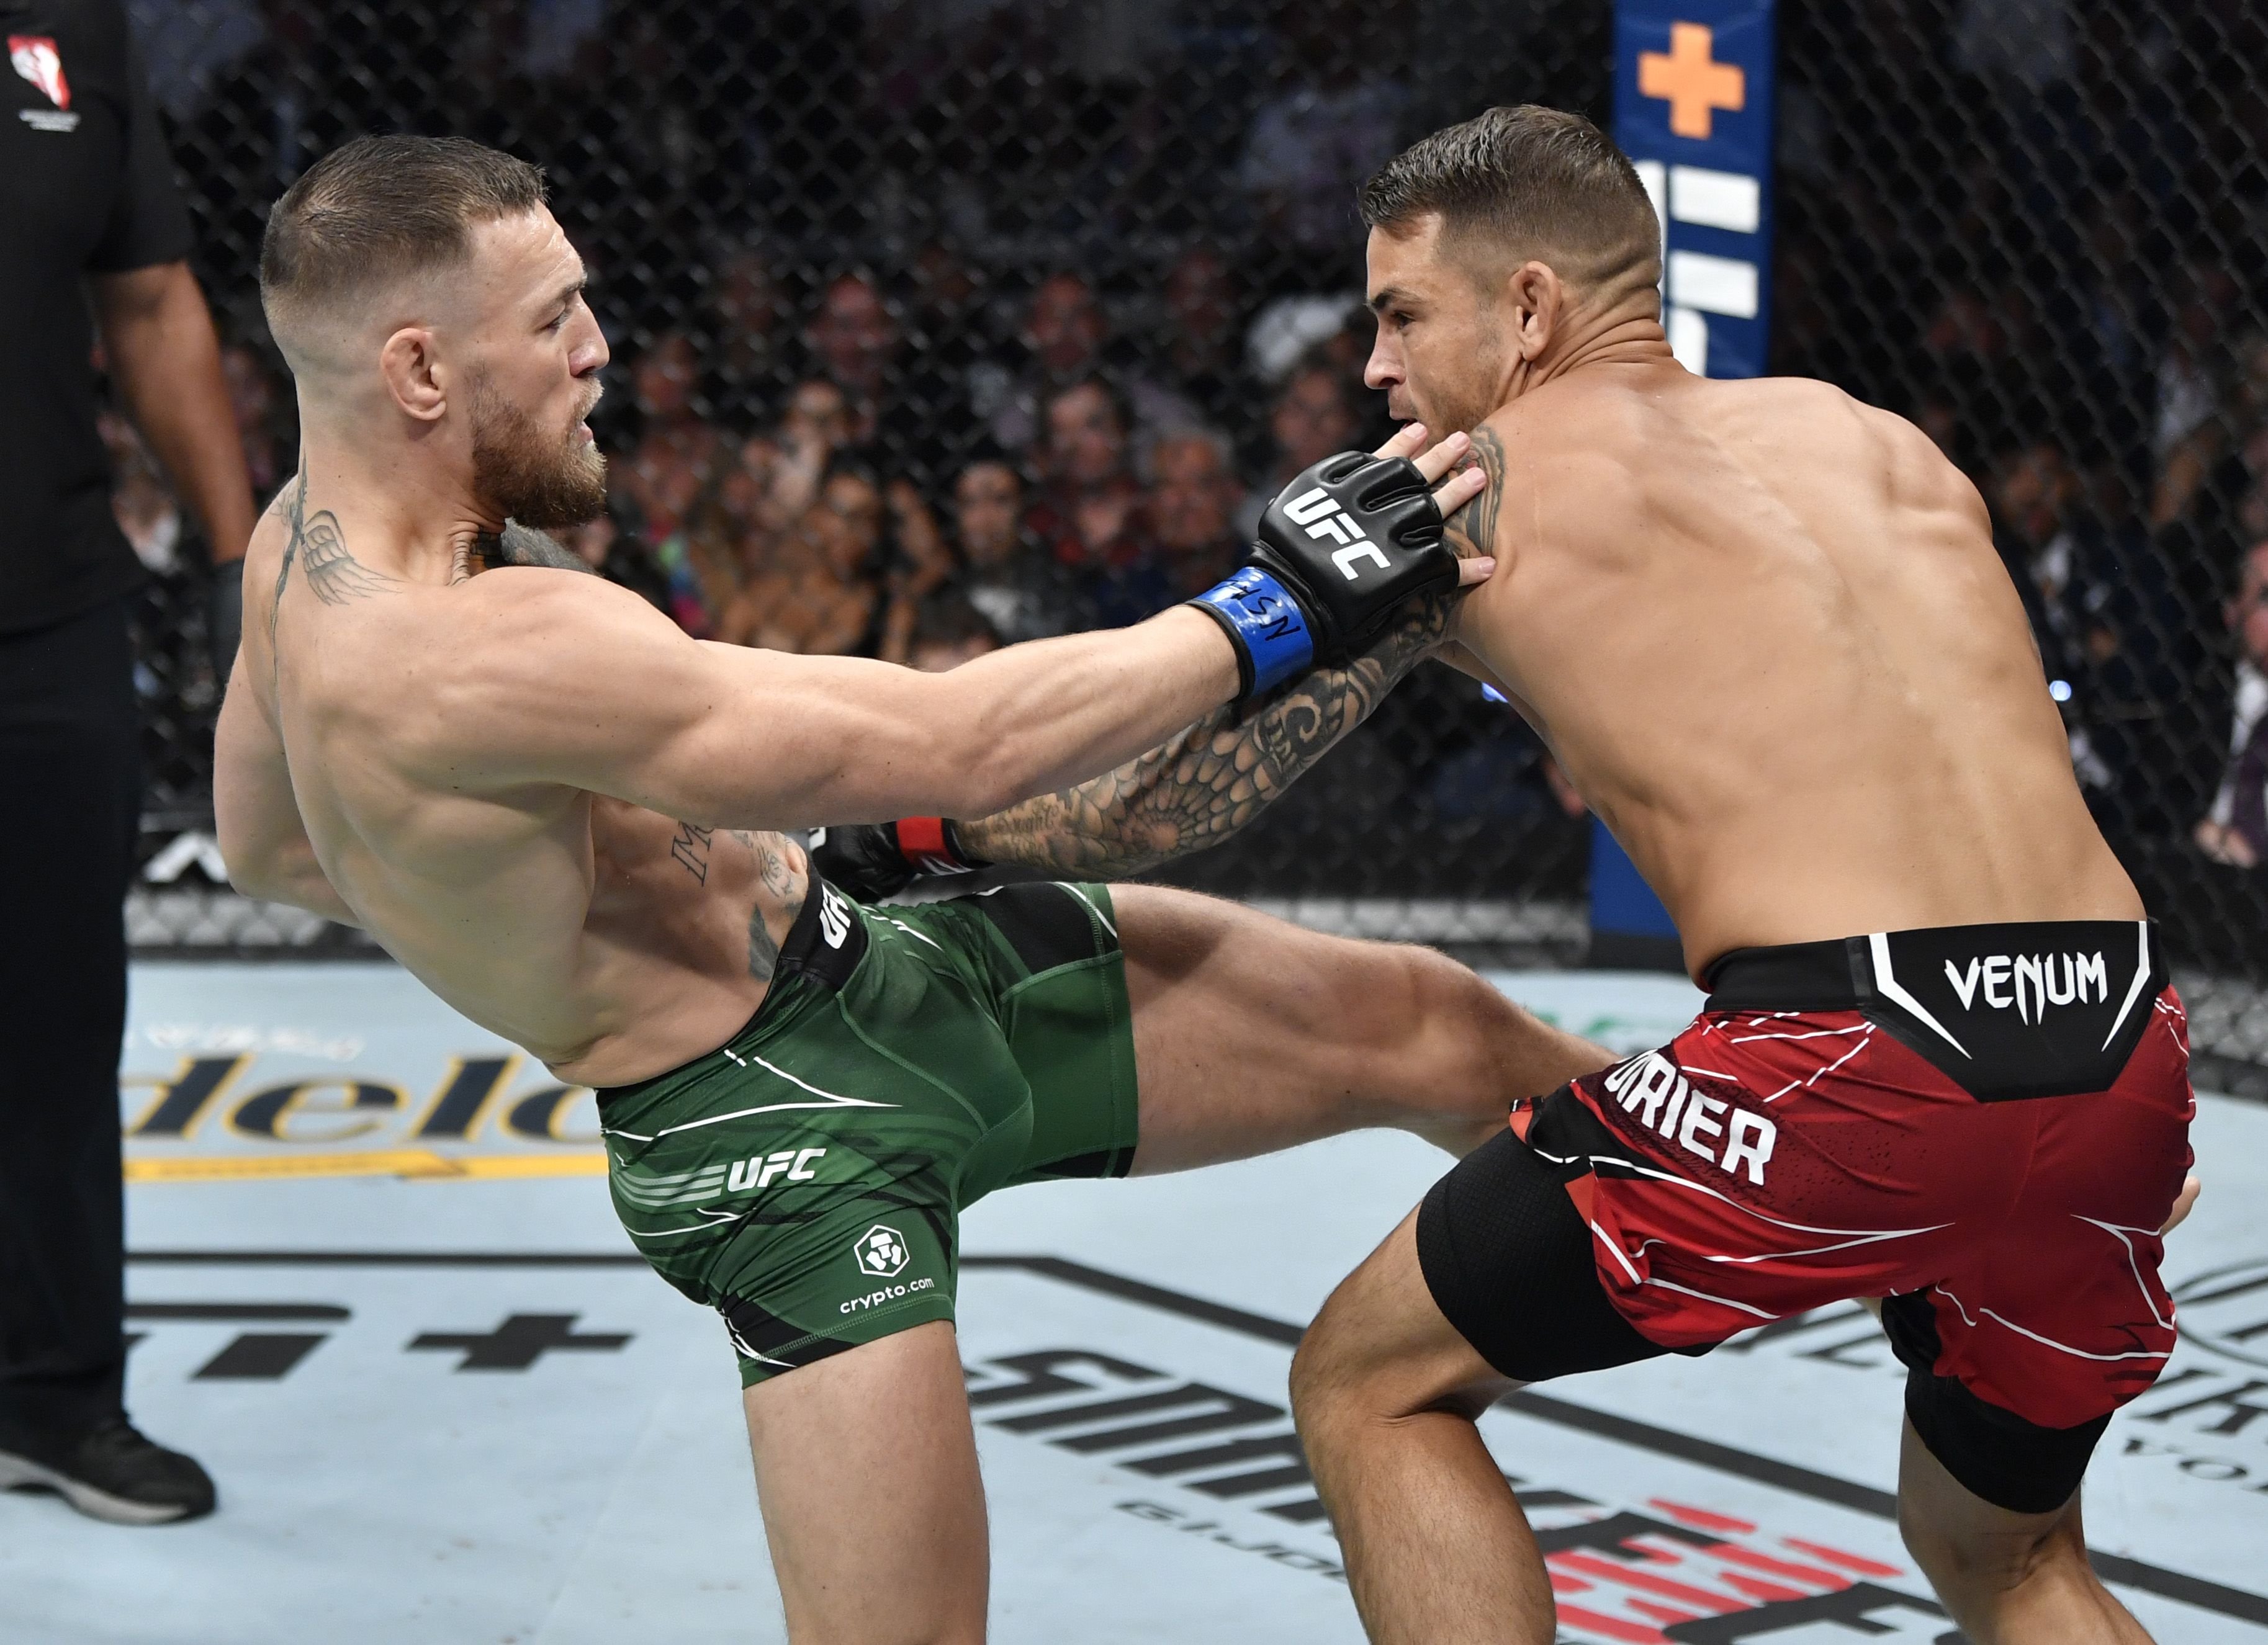 Quick Recap: Dustin Poirier with excellent reversals and grapples